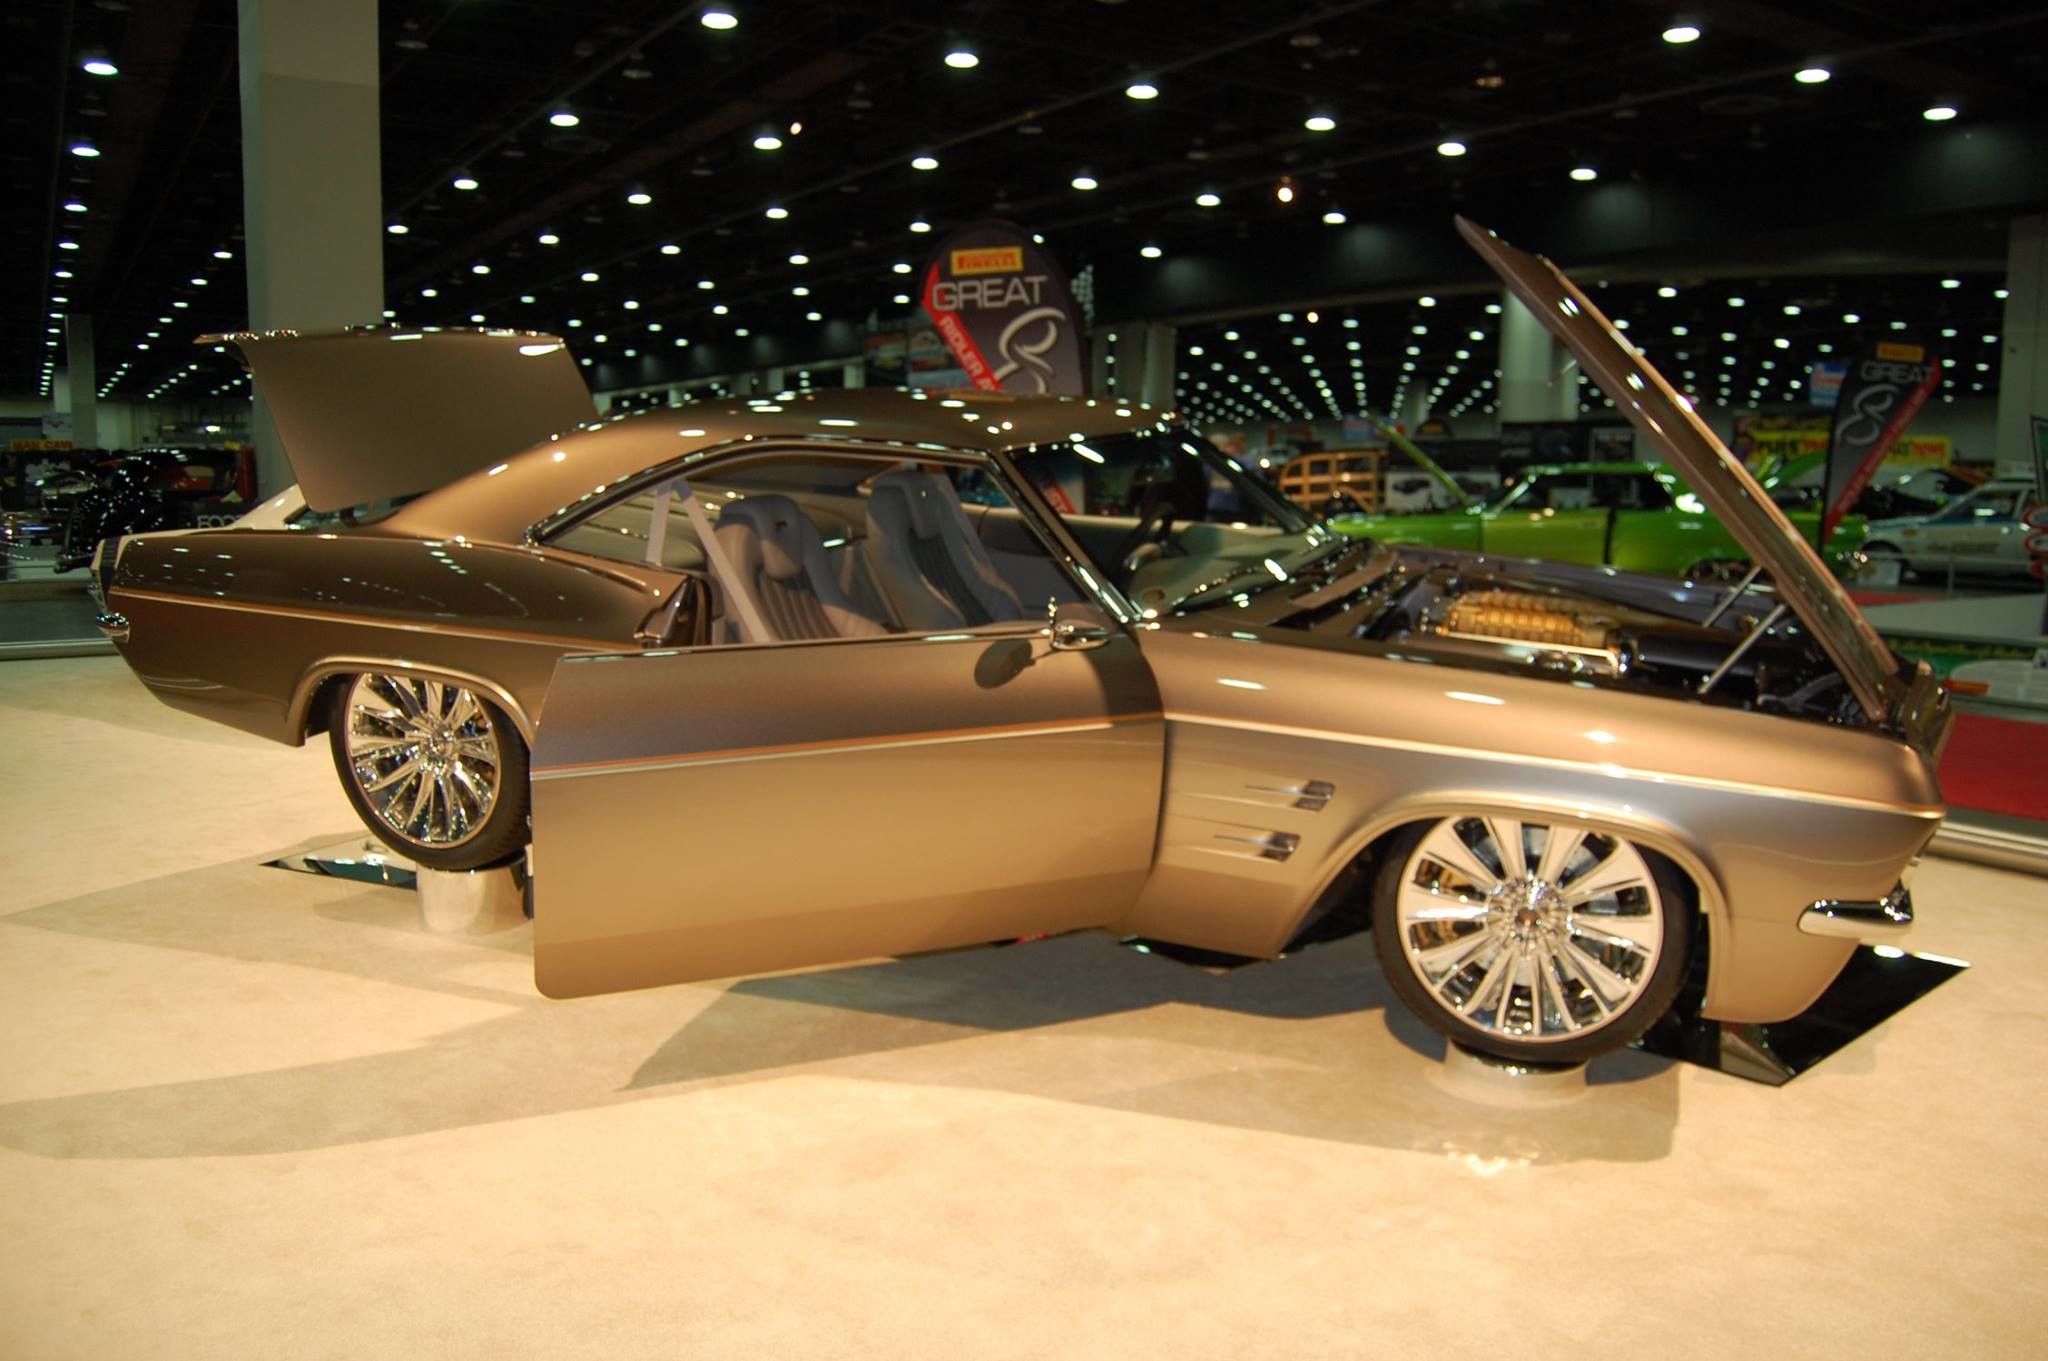 2048x1361 Chip Foose Cadillac | Sweet old cars | Pinterest | Chip foose, Cadillac and  Eugene o'neill